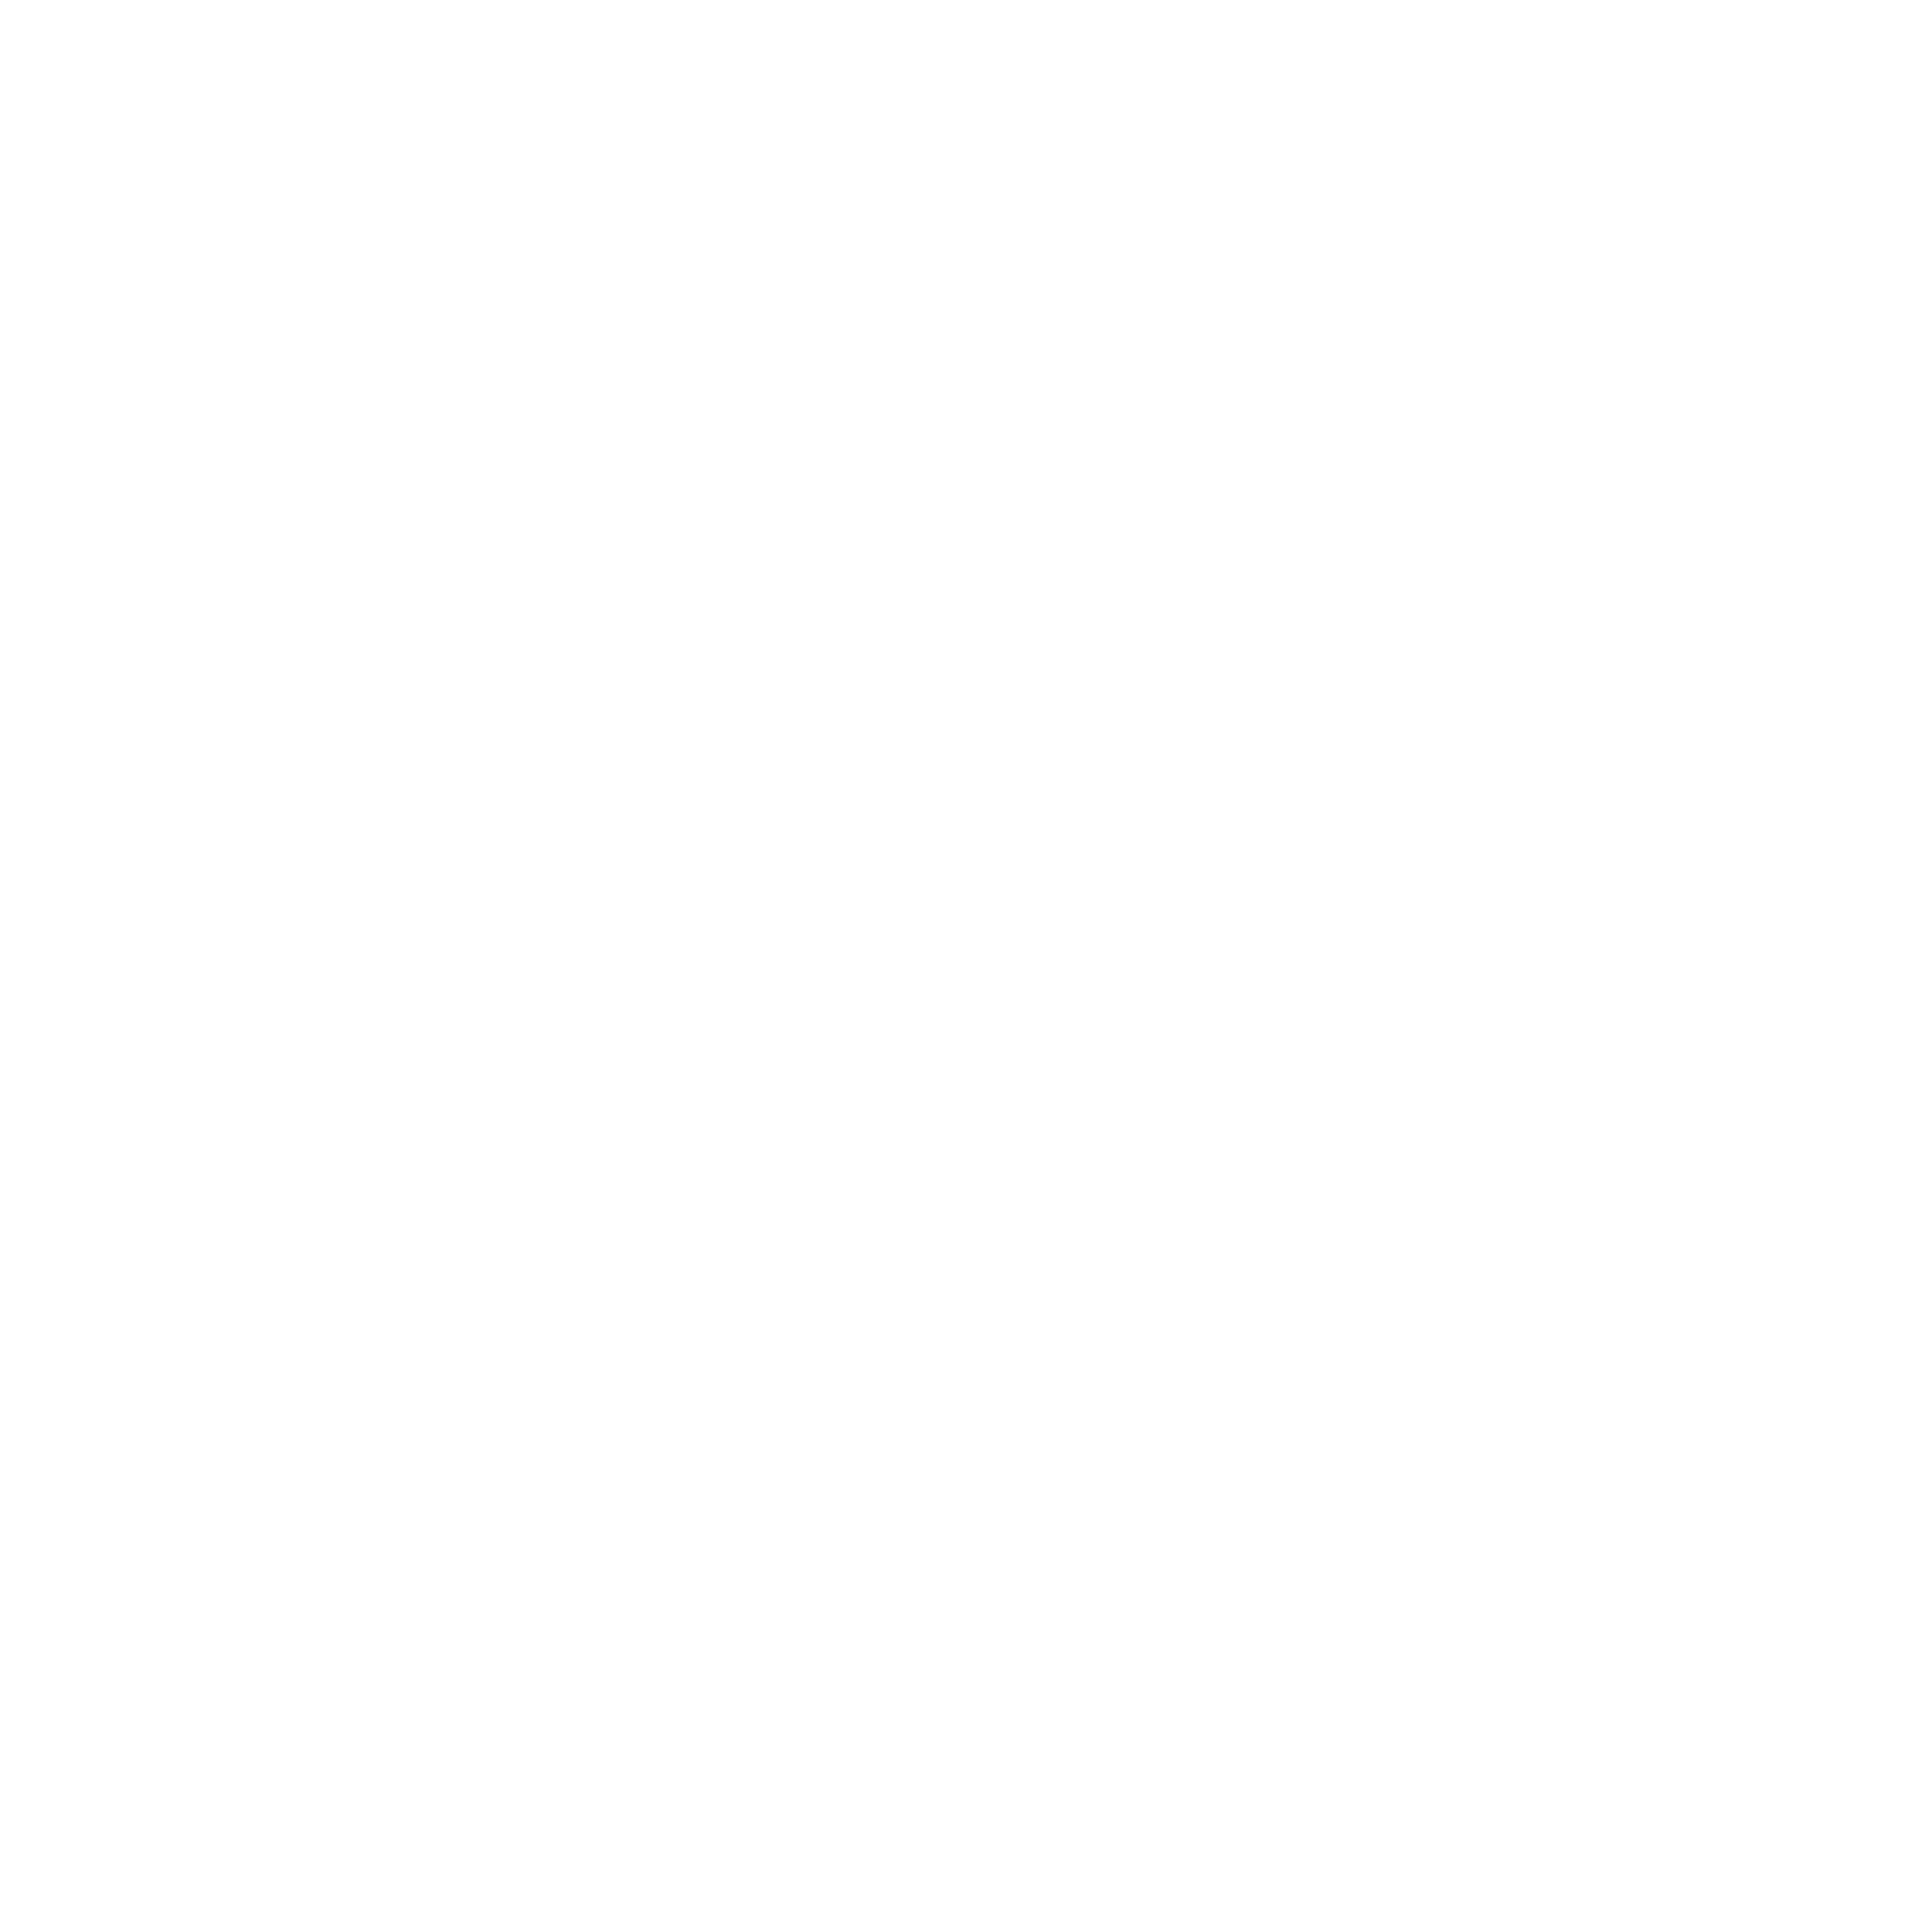 Transparent Snowfall PNG Picture.